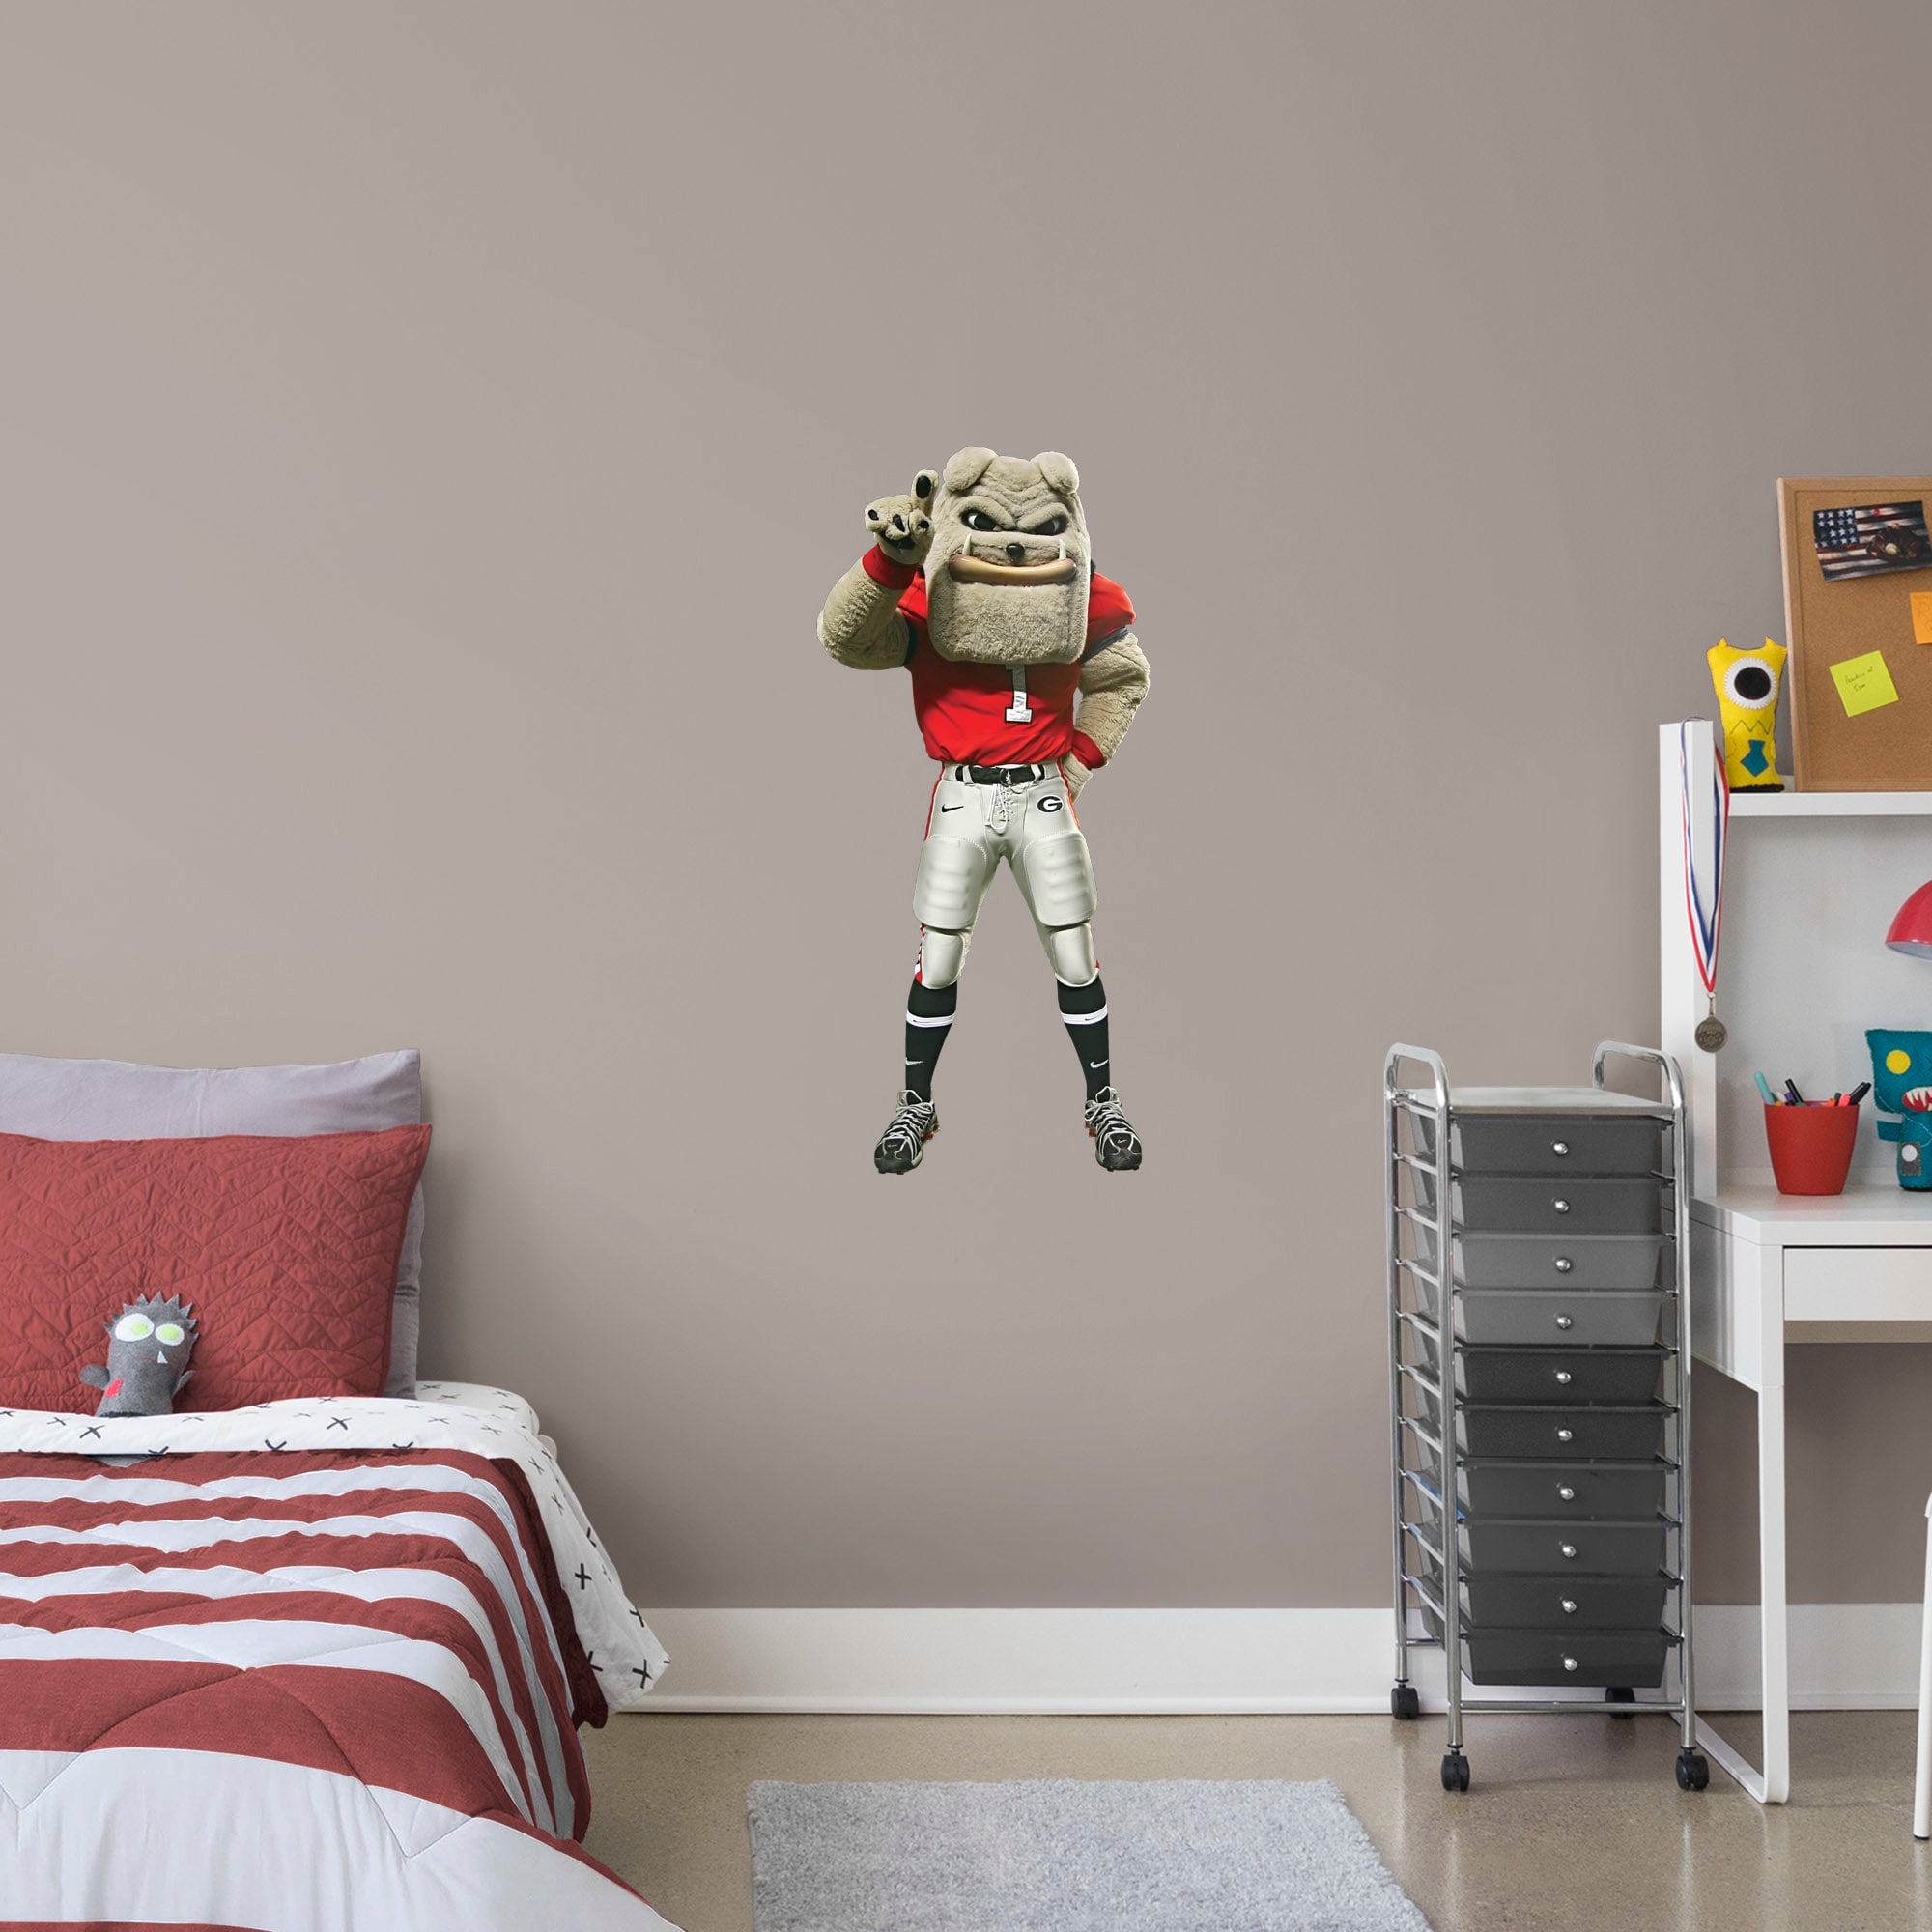 Georgia Bulldogs: Hairy Dawg Mascot - Officially Licensed Removable Wall Decal XL by Fathead | Vinyl